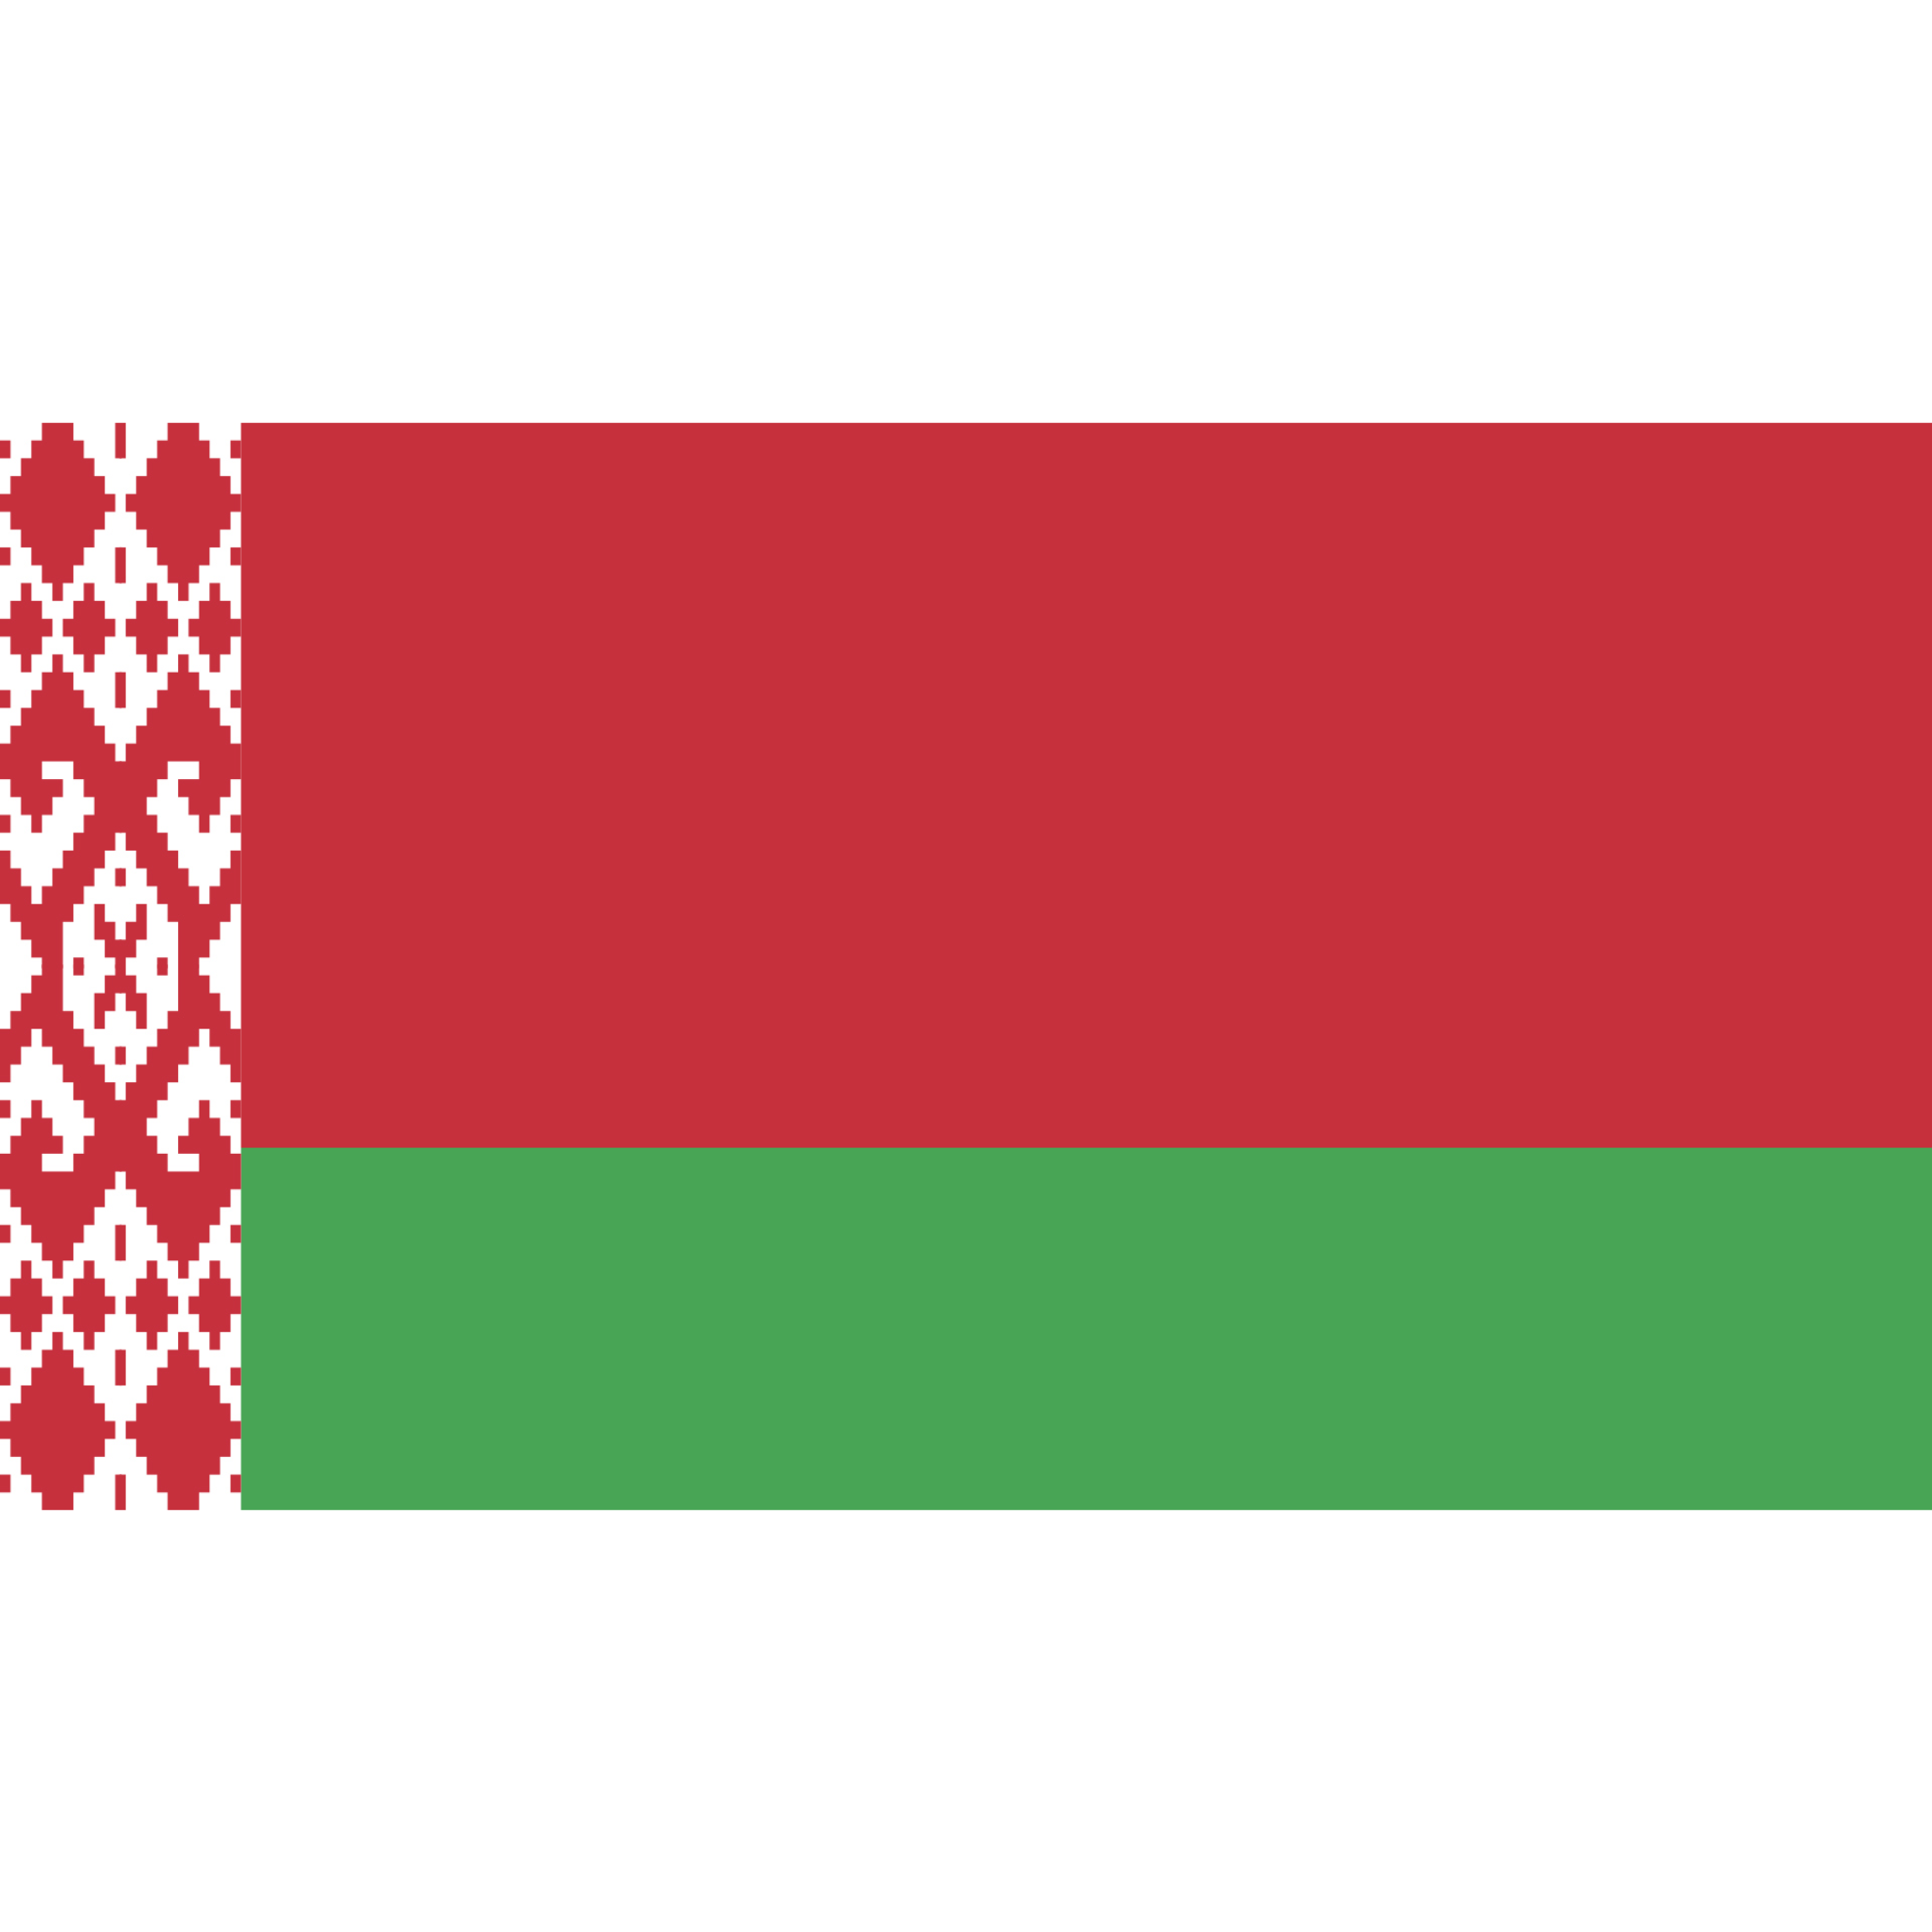 The Belarus flag has 2 horizontal bands in red (double width) and green, with a patterned white vertical stripe on the left.